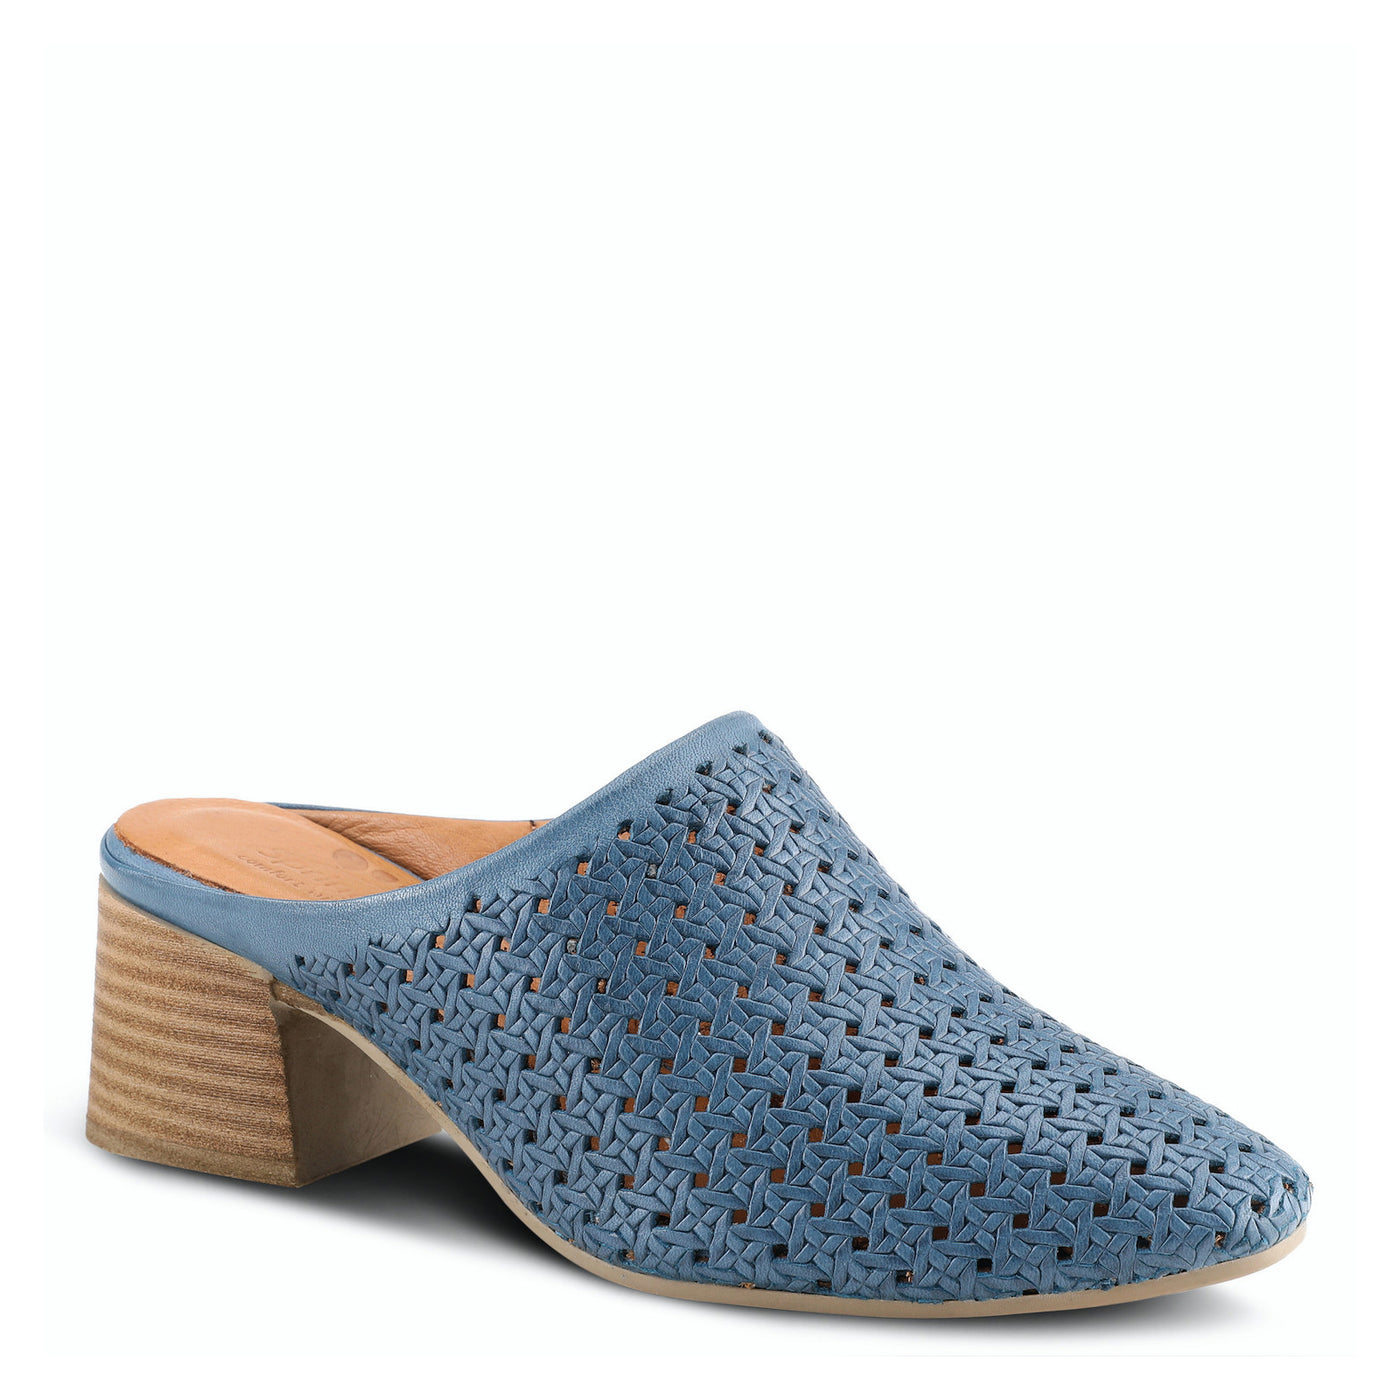 Arlyse Woven Leather Mule